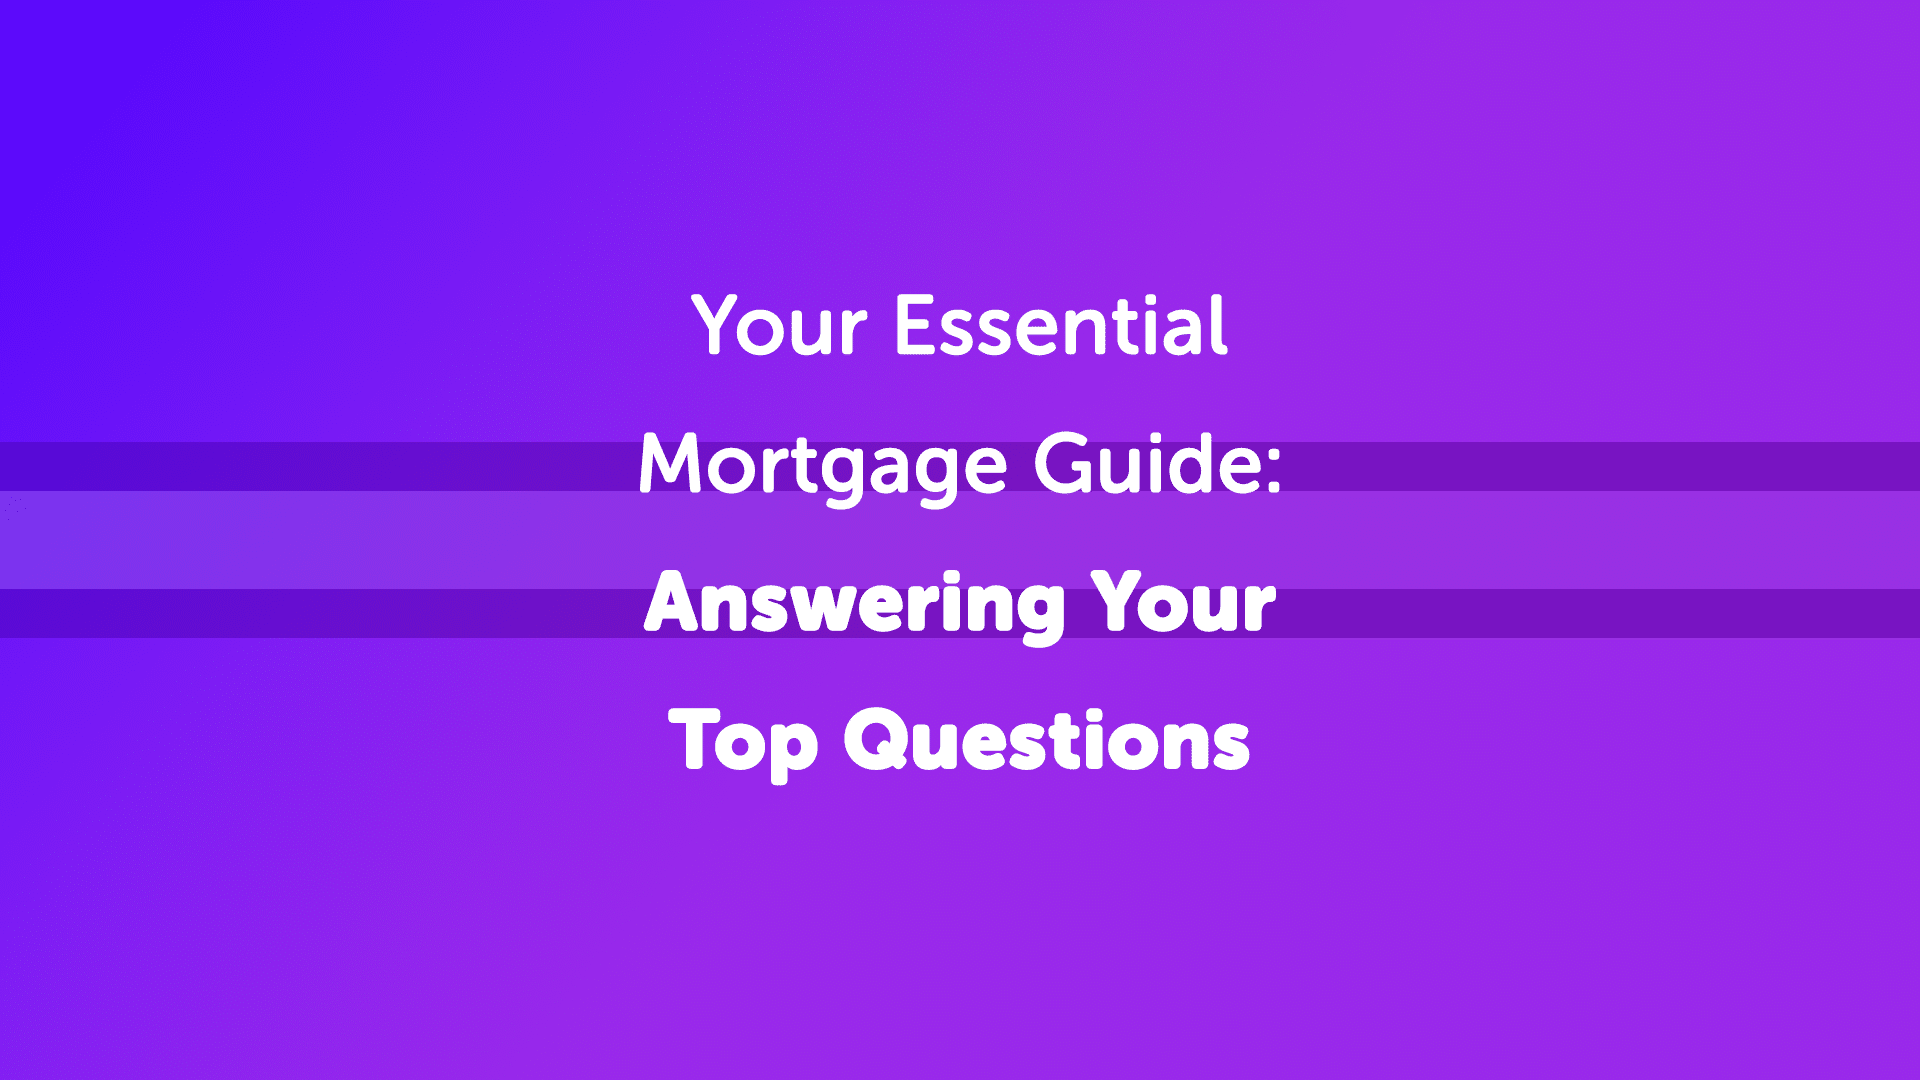 Your Essential Guide to Mortgages in Manchester